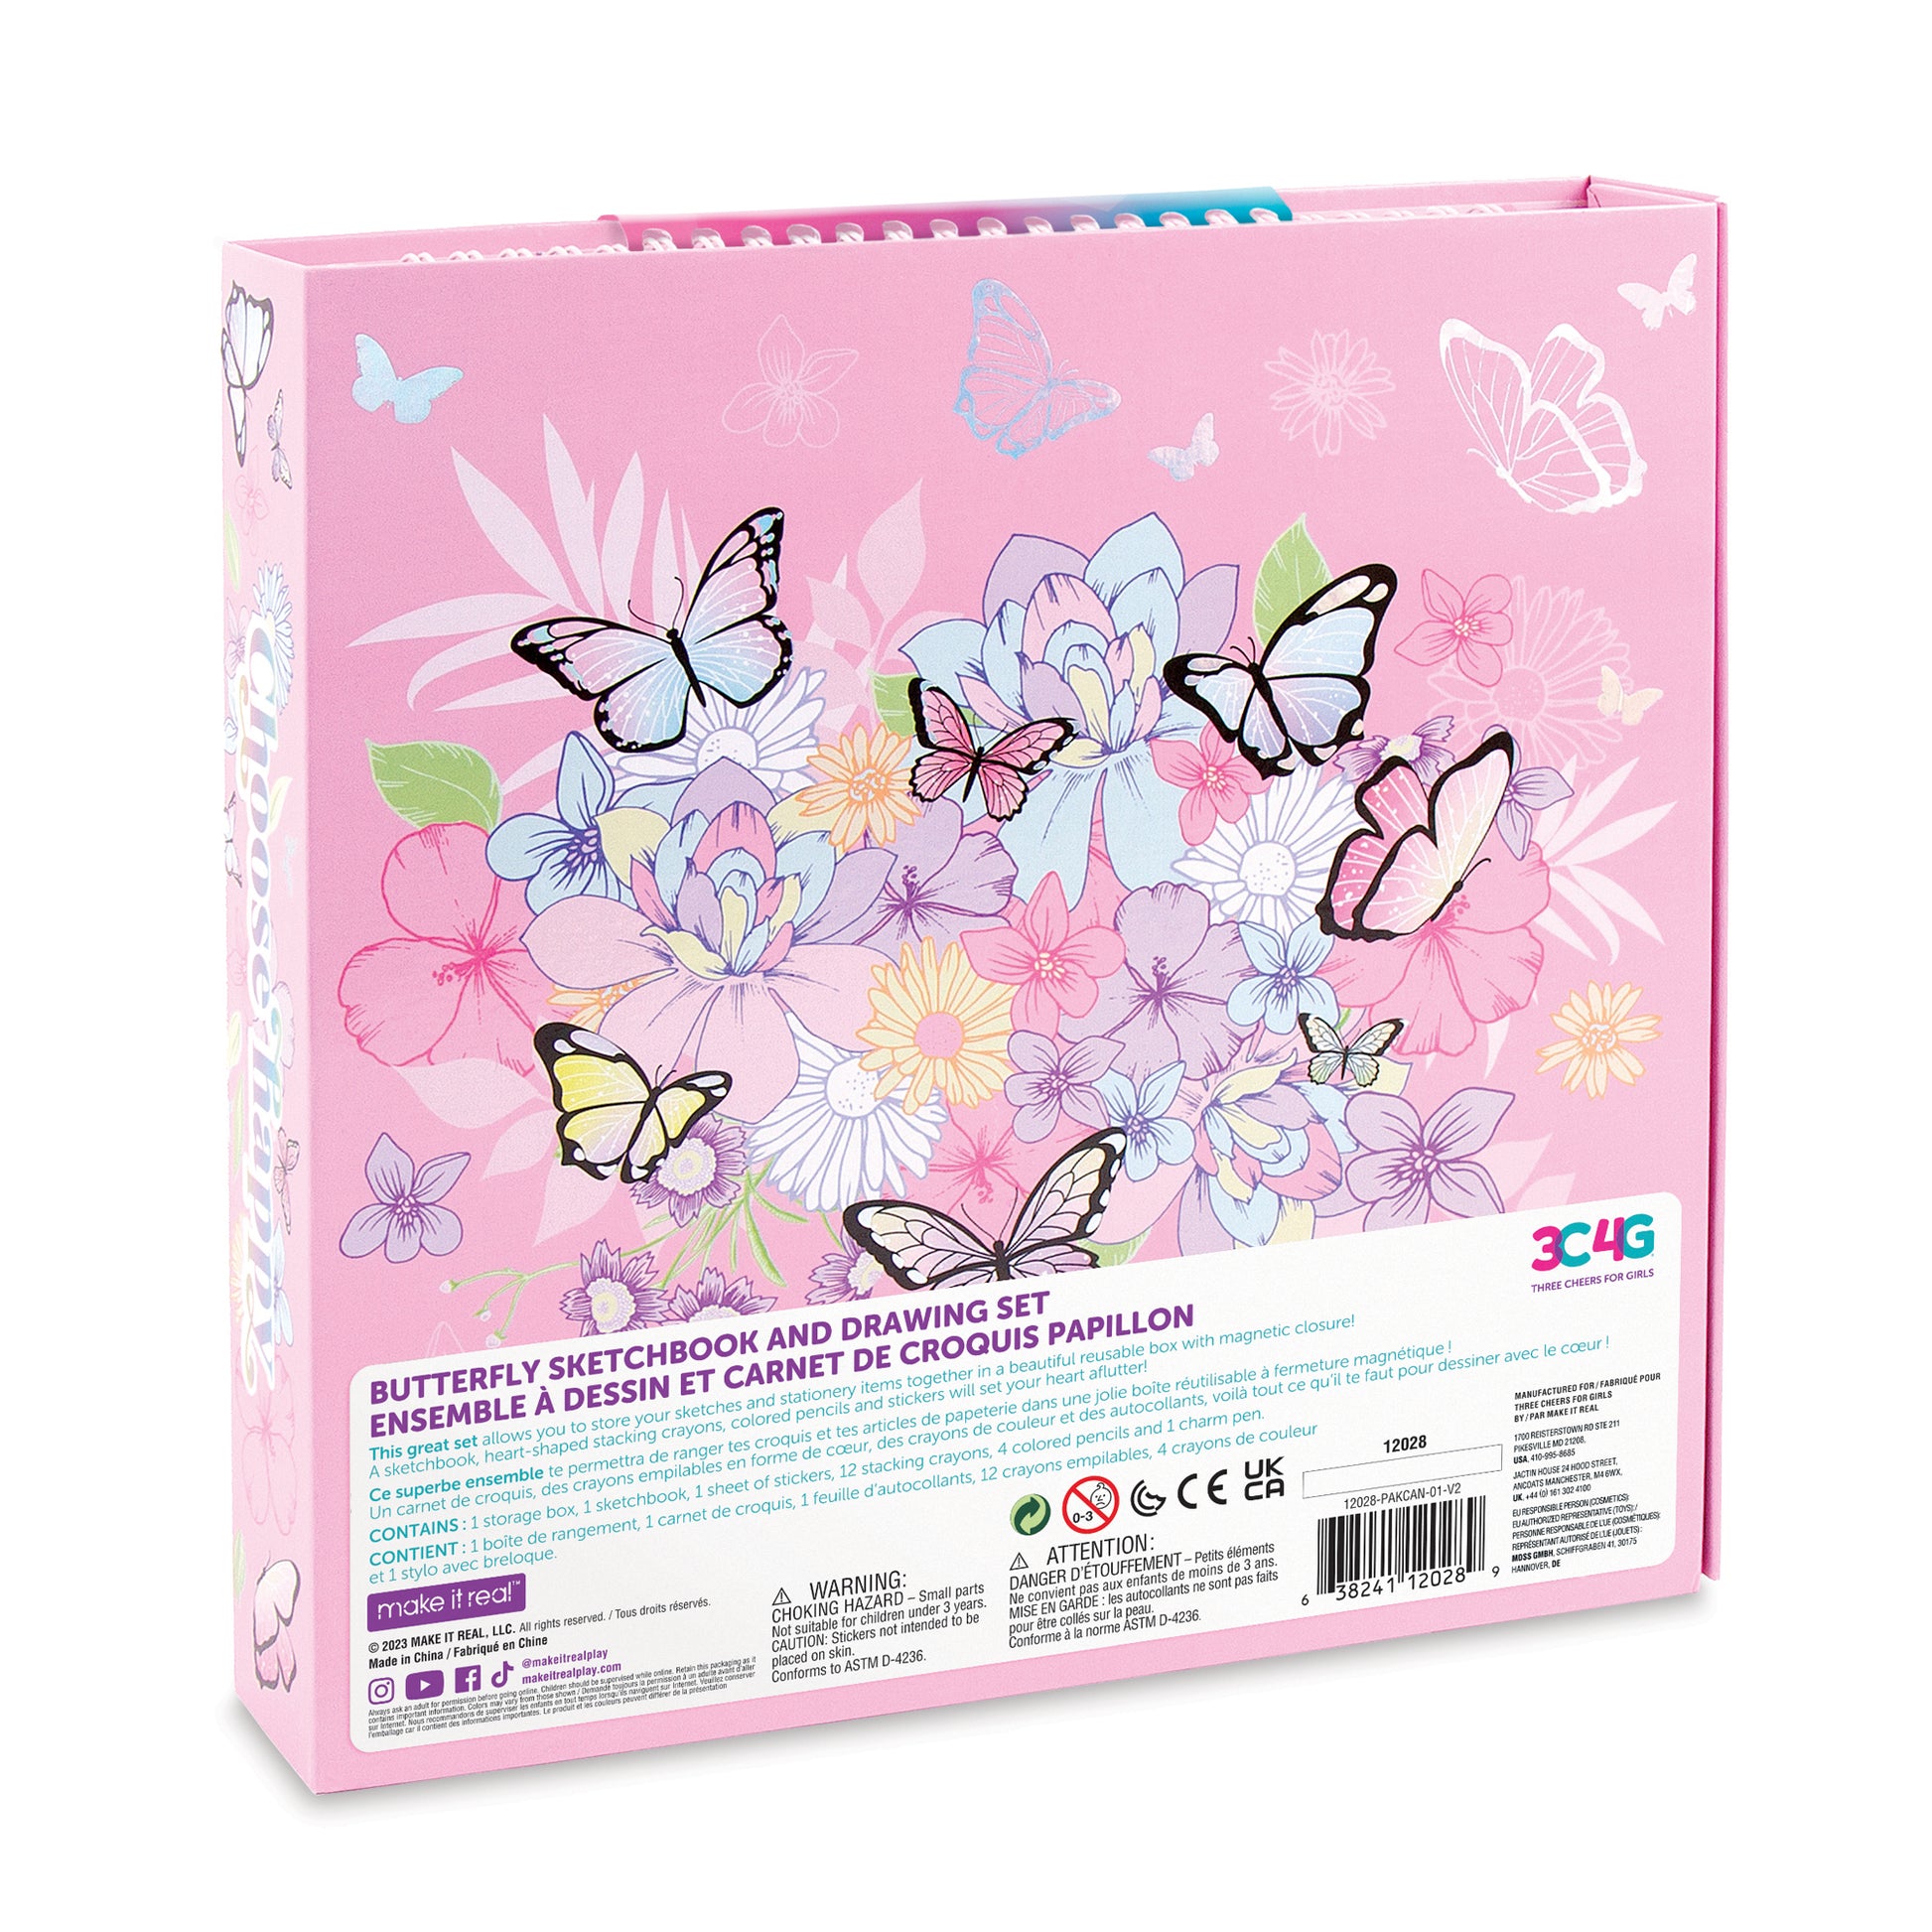 Butterfly Sketchbook and Drawing Set – Make It Real